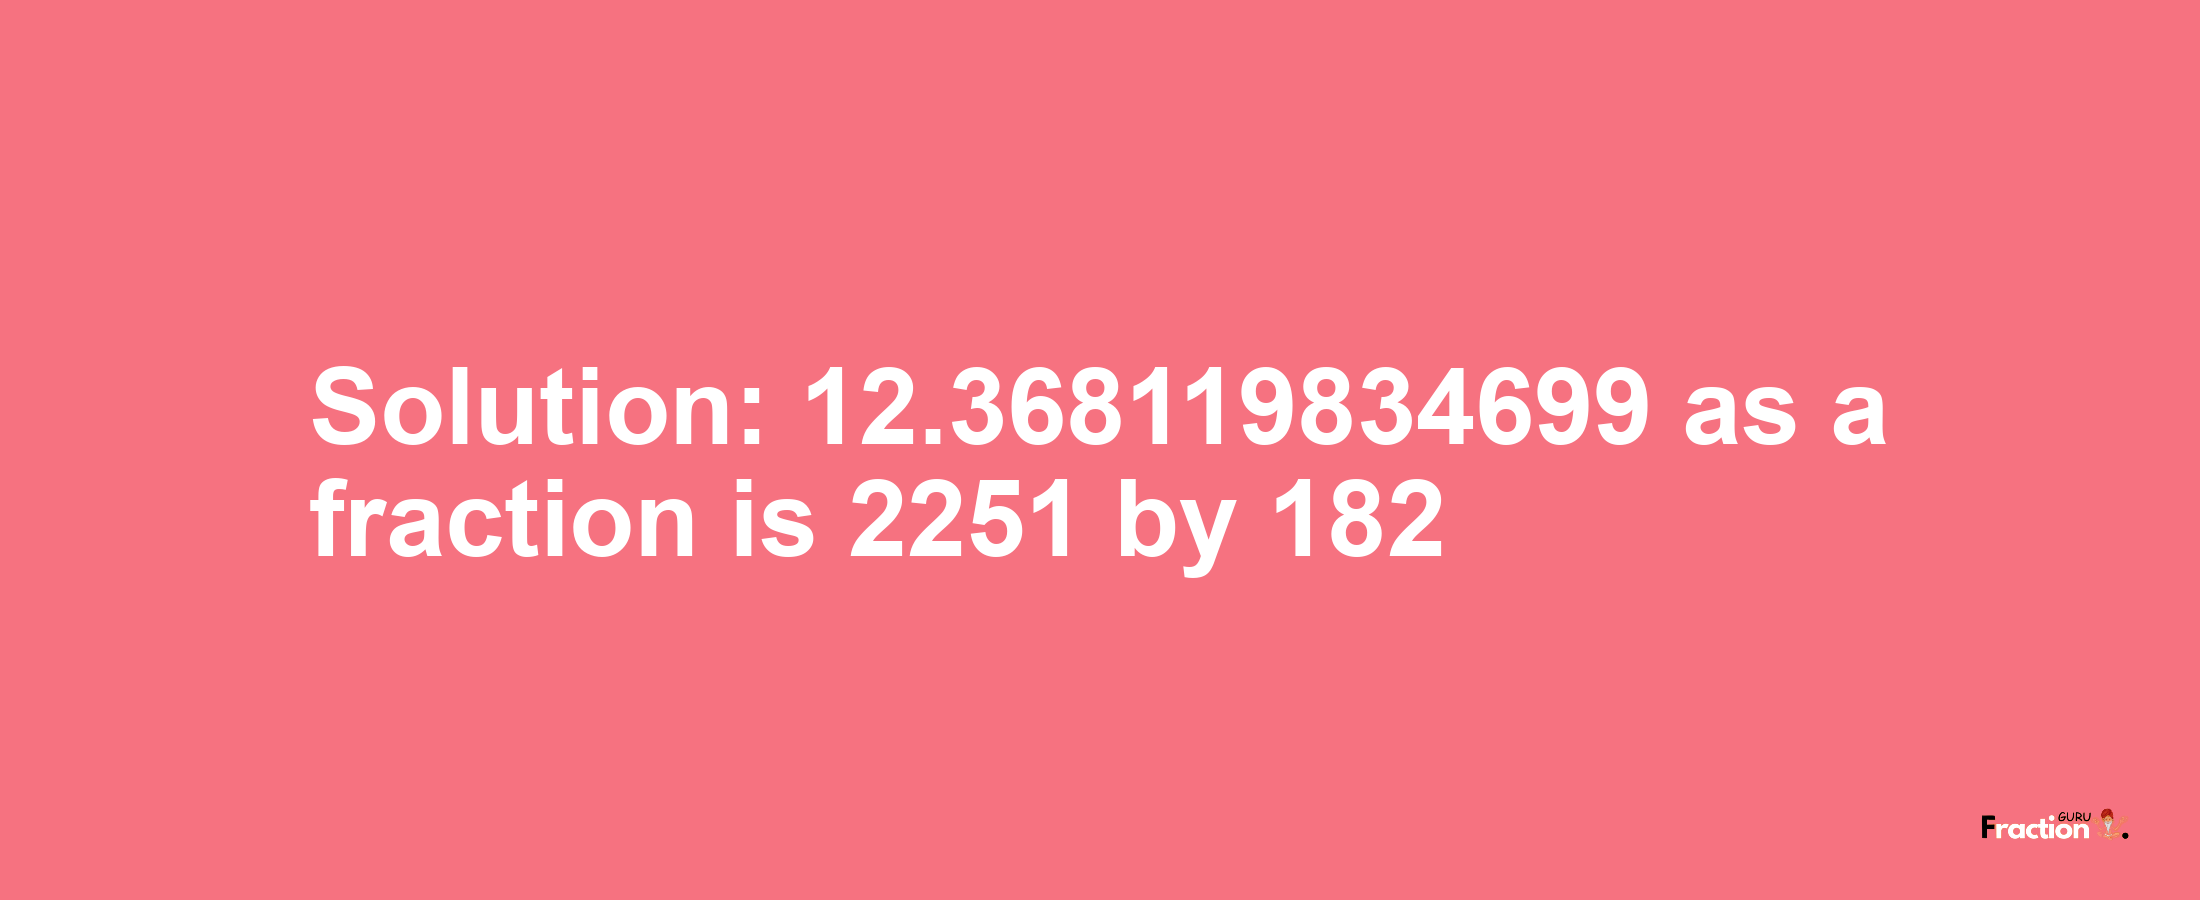 Solution:12.368119834699 as a fraction is 2251/182